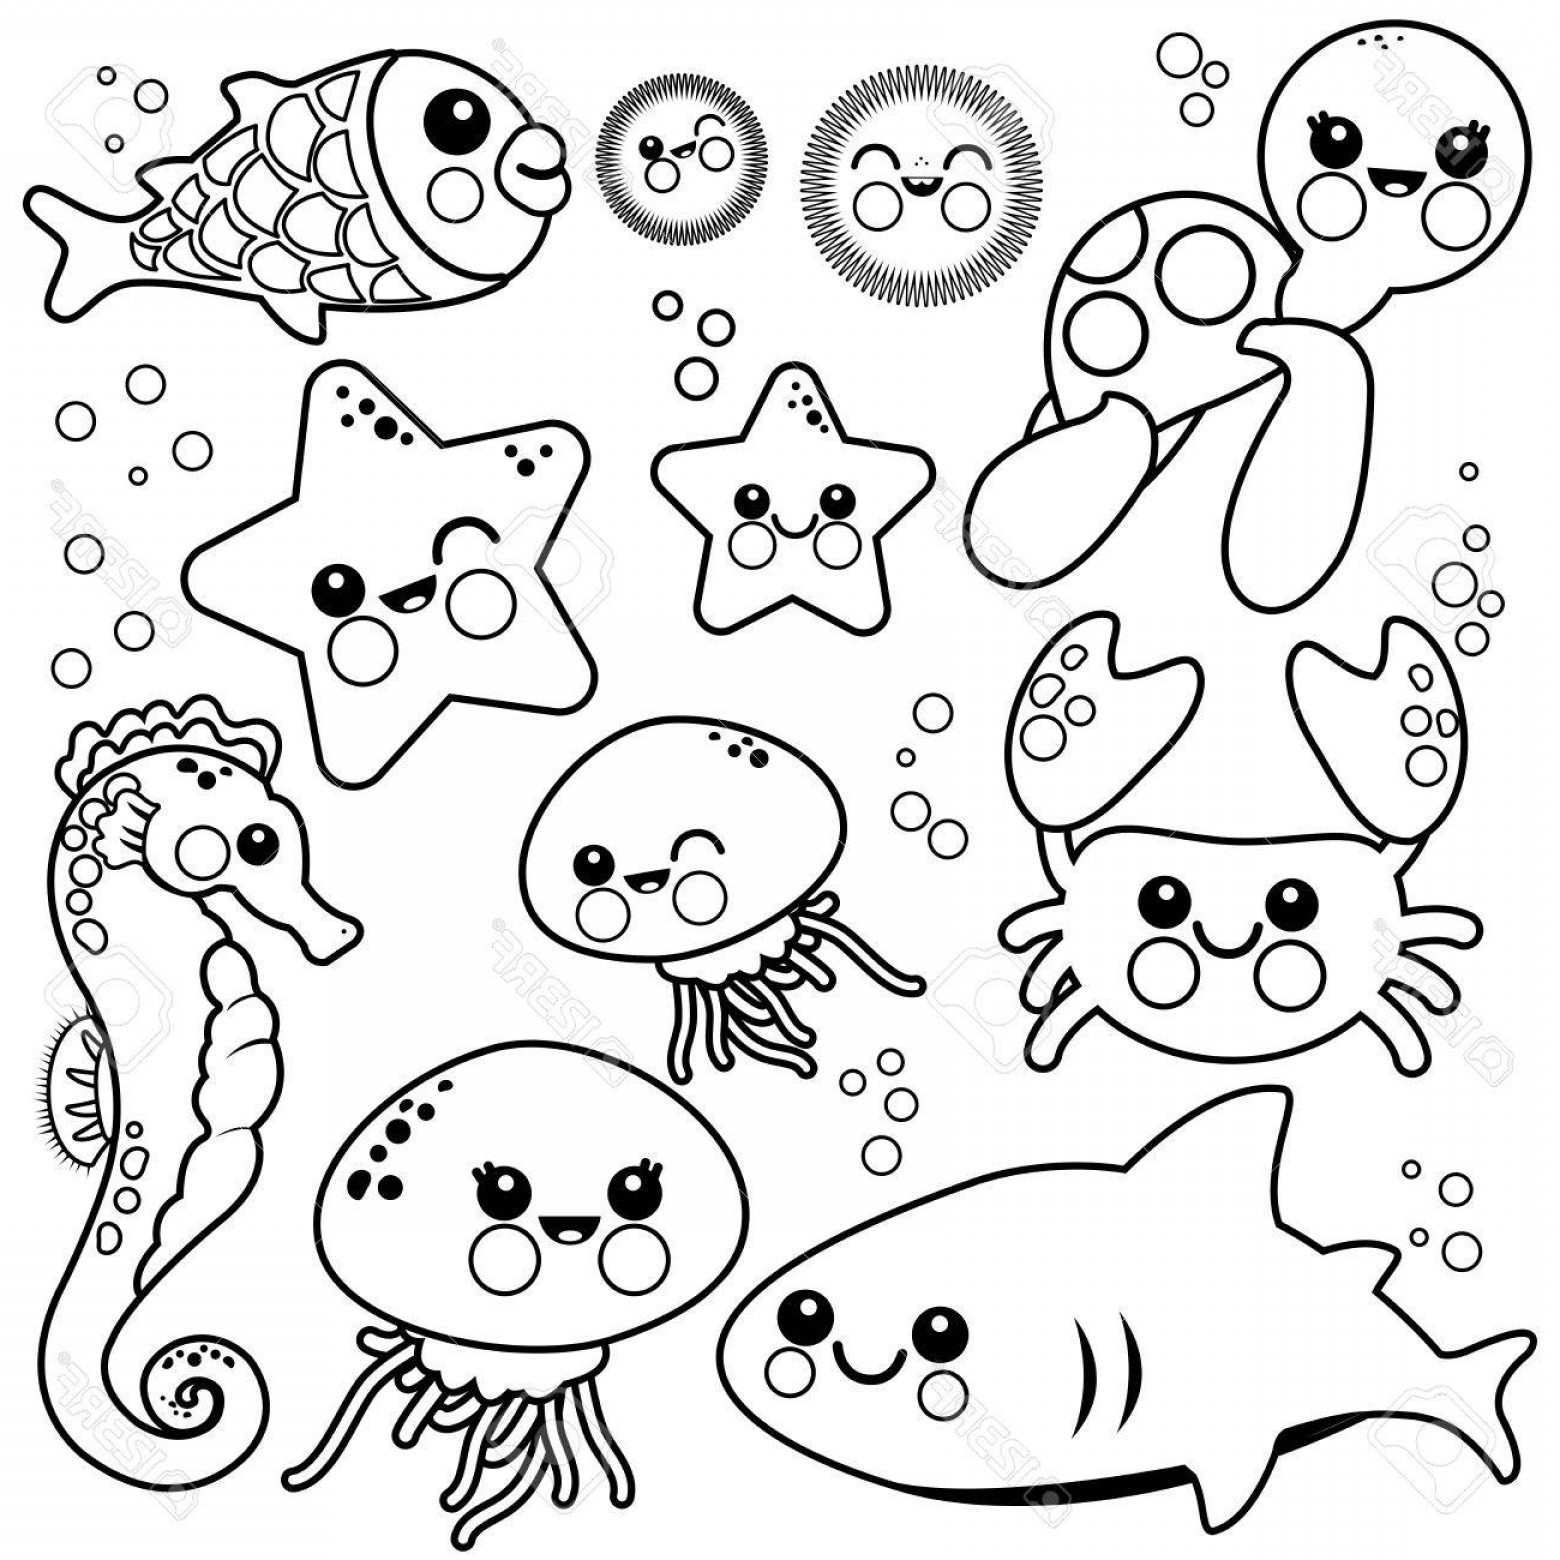 Sea Monster Coloring Pages Sea Creatures Coloring Pages Luxury New Free Sea Creature Coloring